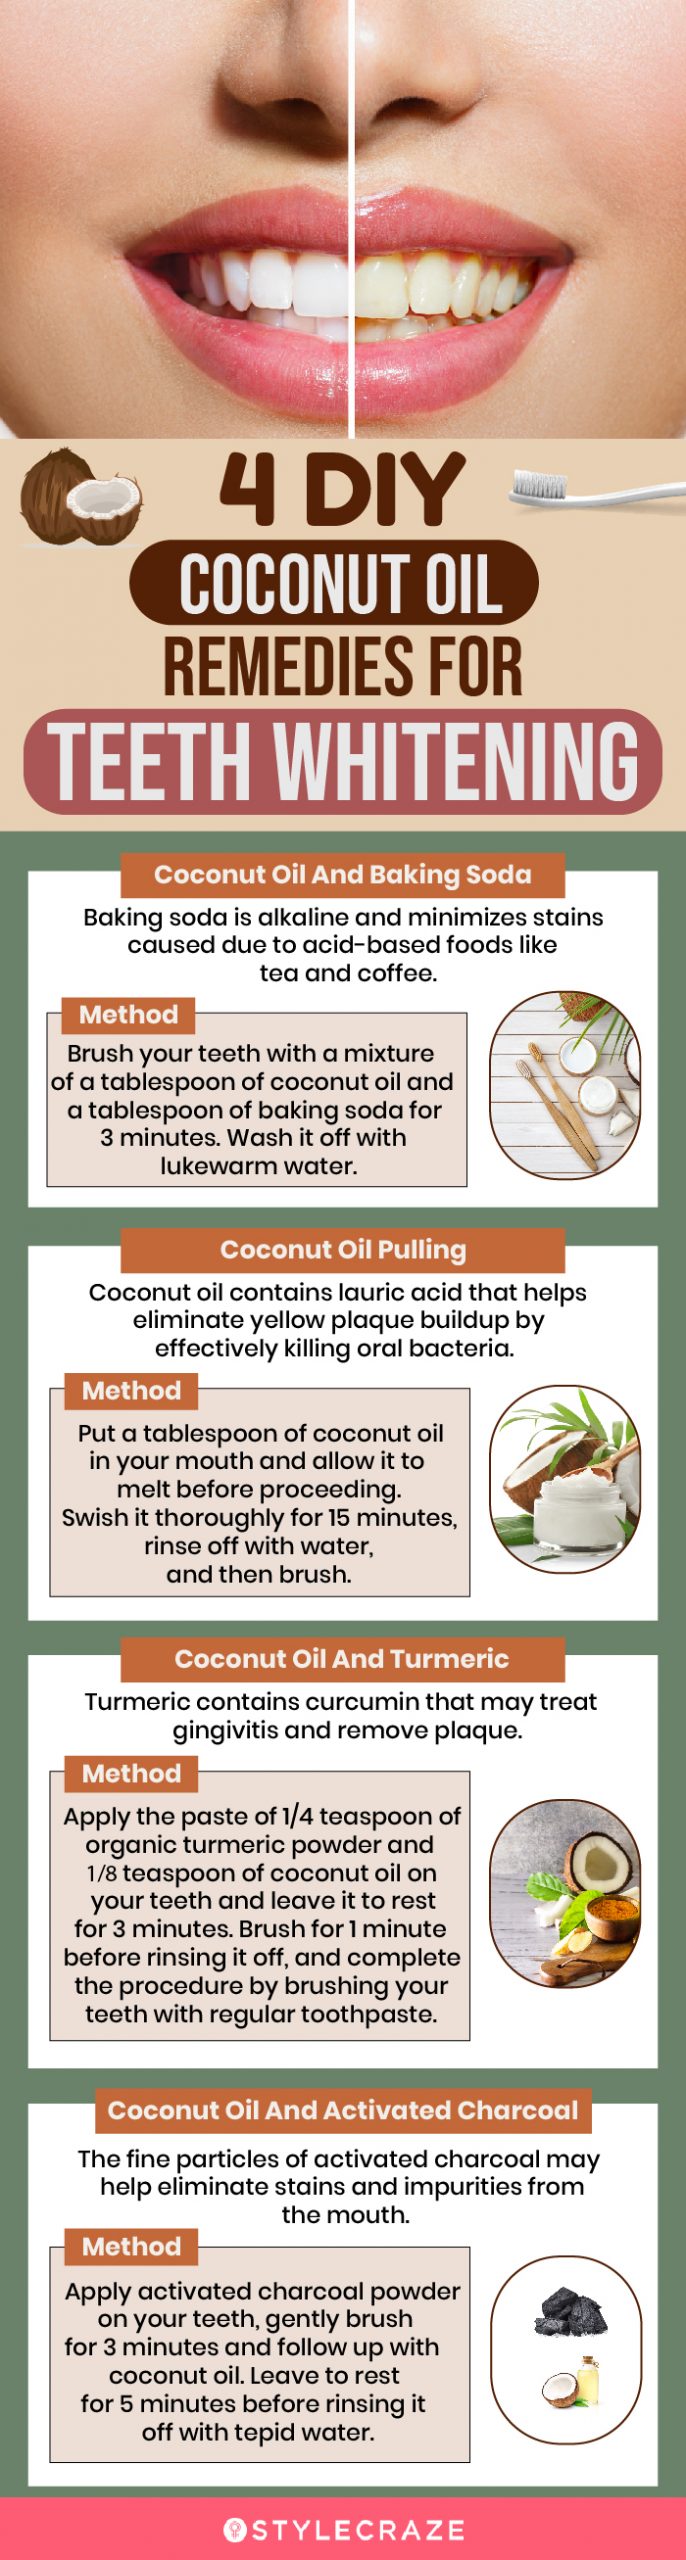 4 diy coconut oil remedies for teeth whitening (infographic)